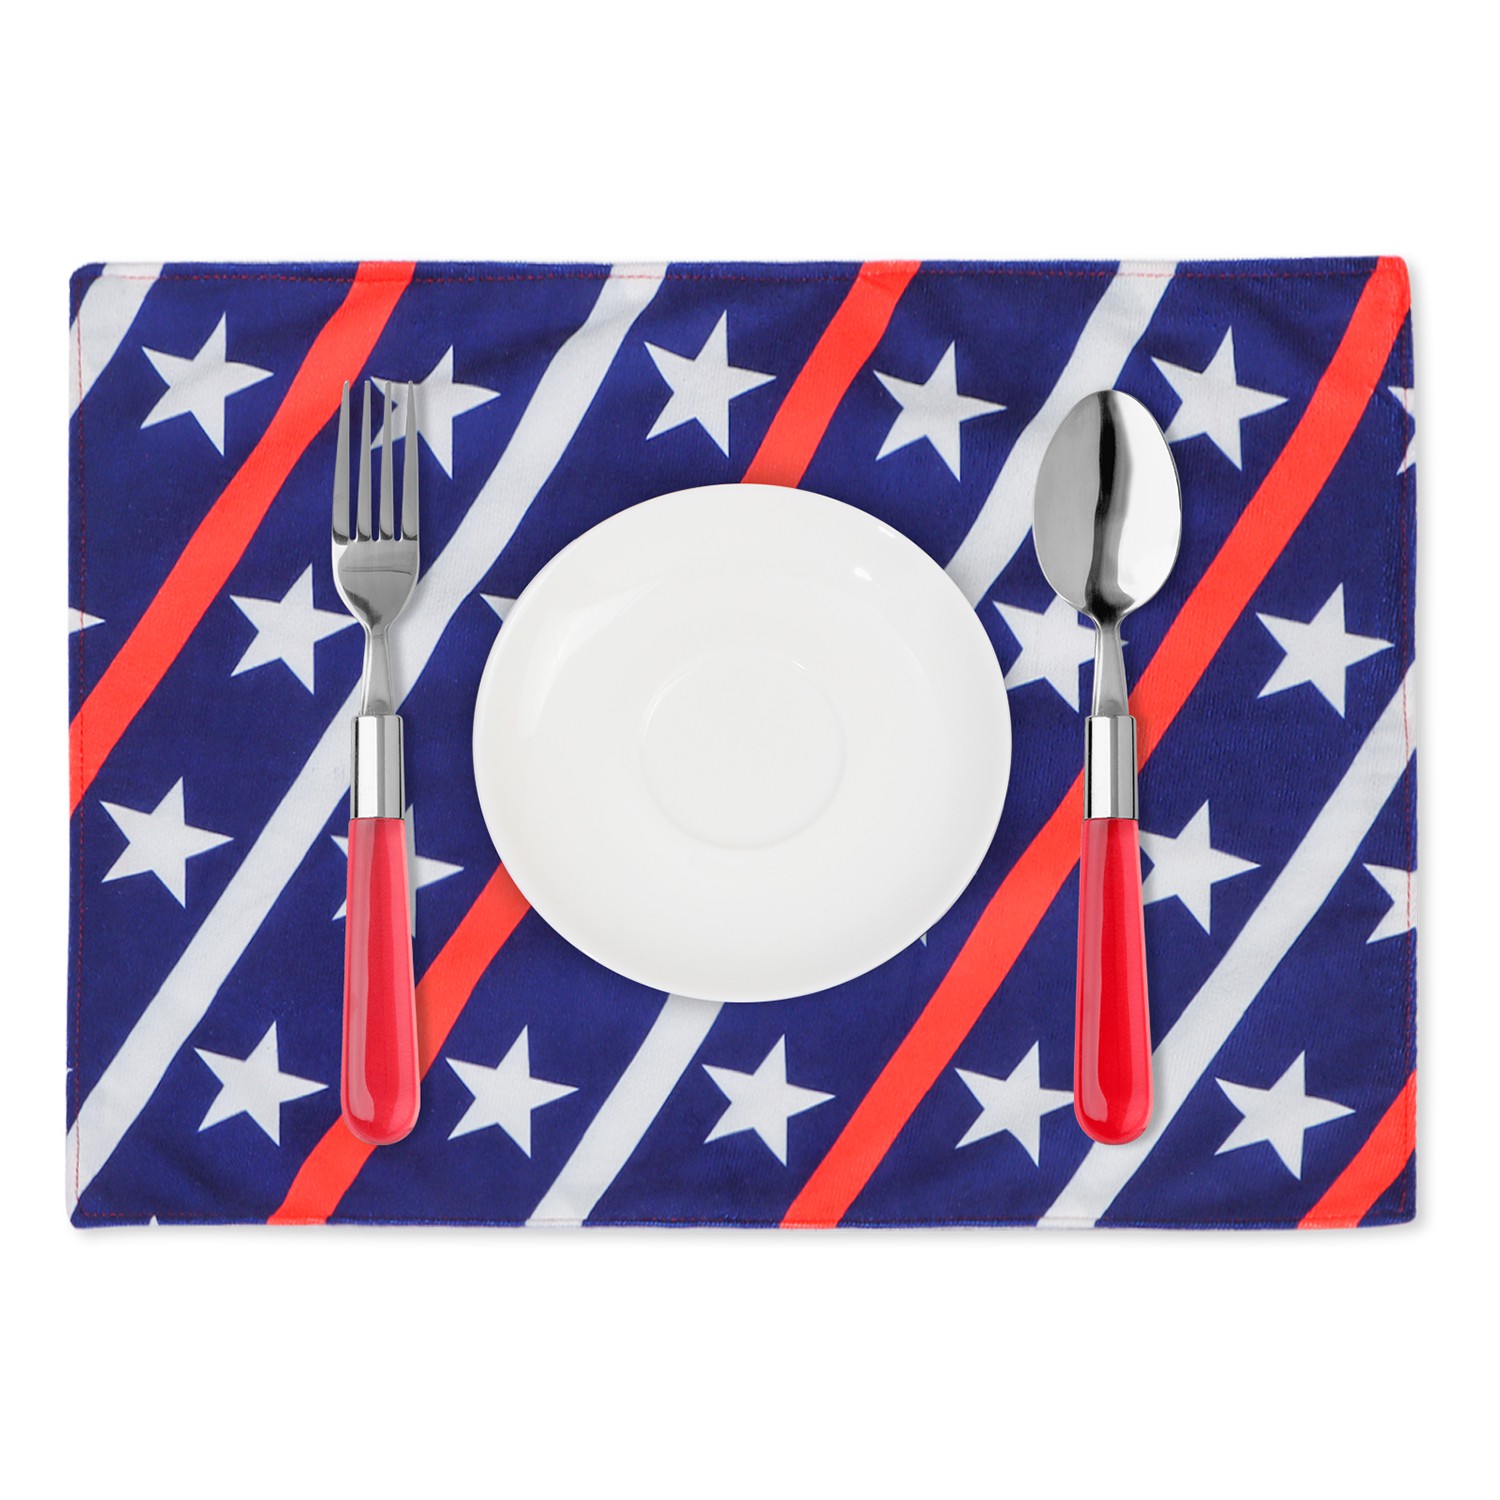 MIOSHOP 4pcs/set Table Decor Placemats Heat-Resistant Table Place Mats Independence Day Kitchen Non-Slip Rectangle Washable American Flag